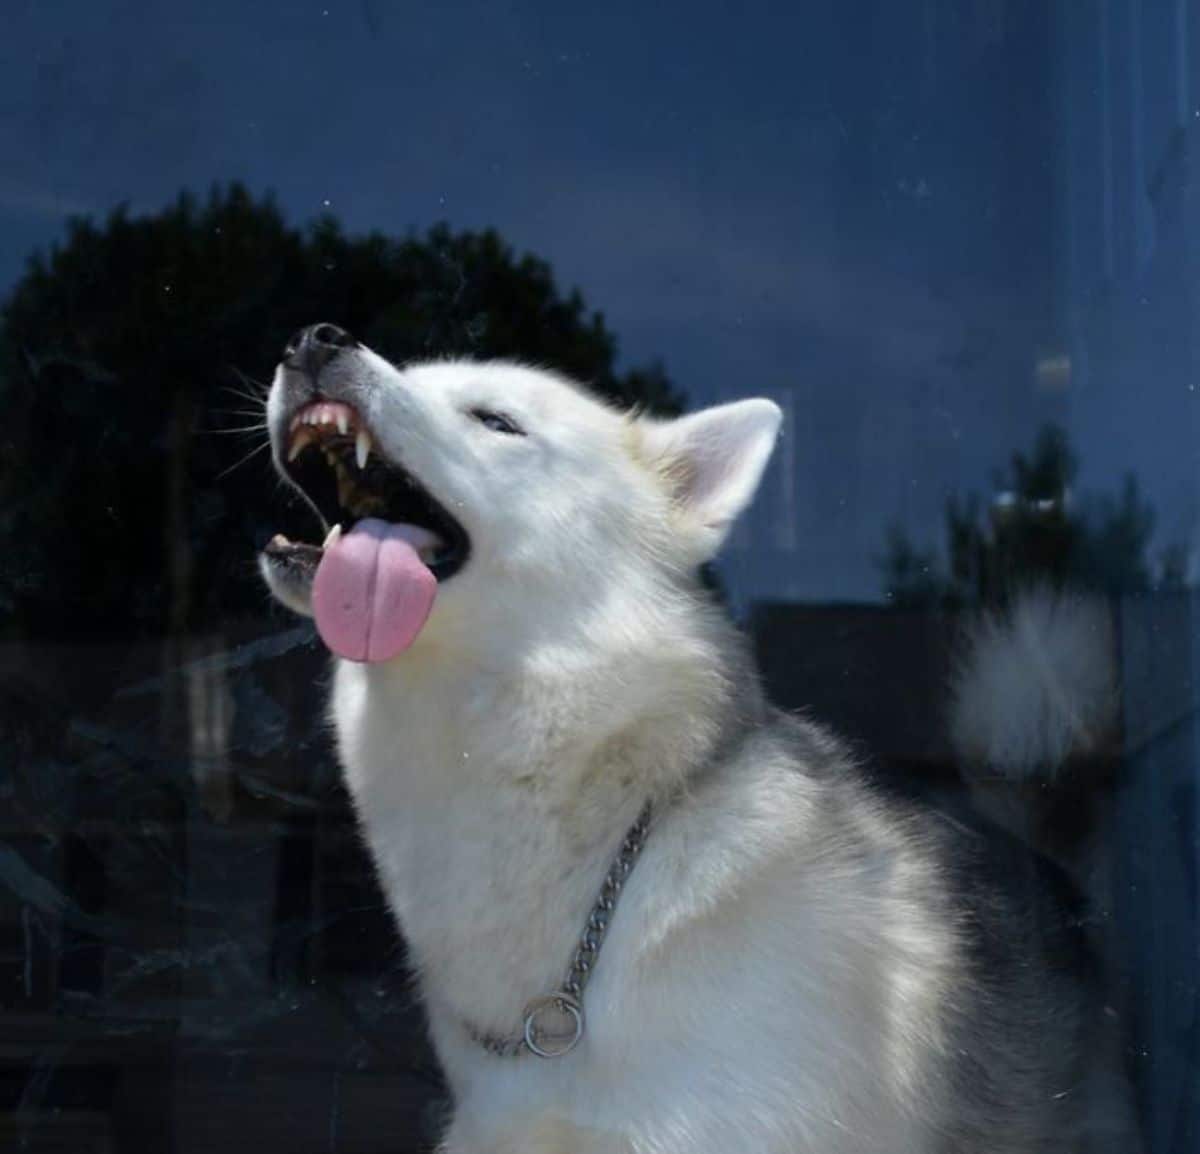 white and grey dog licking a glass while sitting sideways